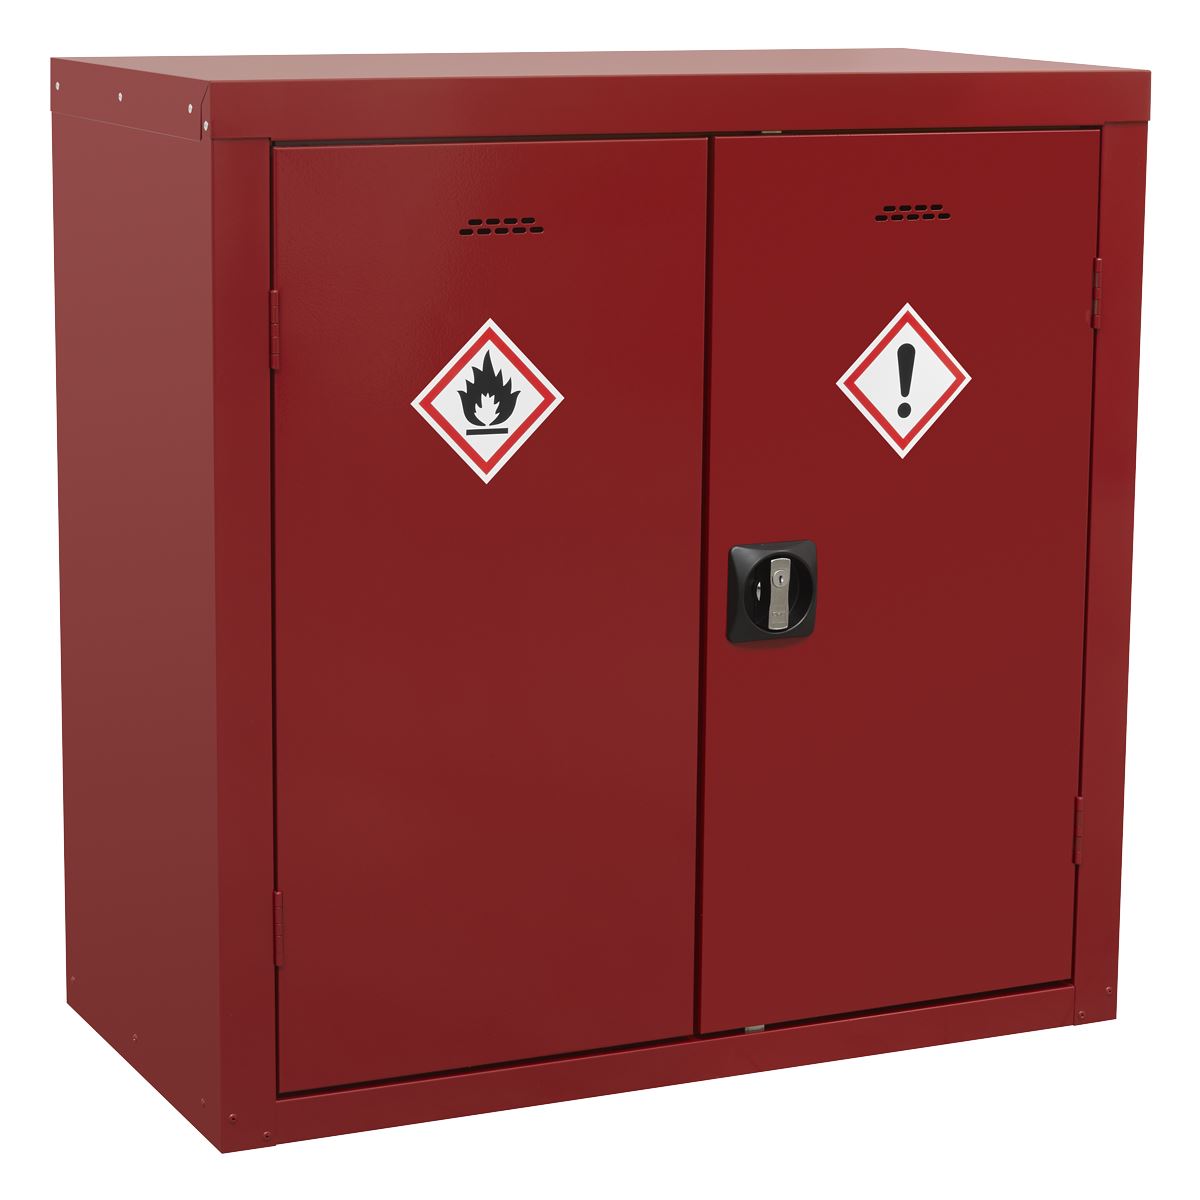 Sealey Pesticide/Agrochemical Substance Cabinet 900 x 460 x 900mm